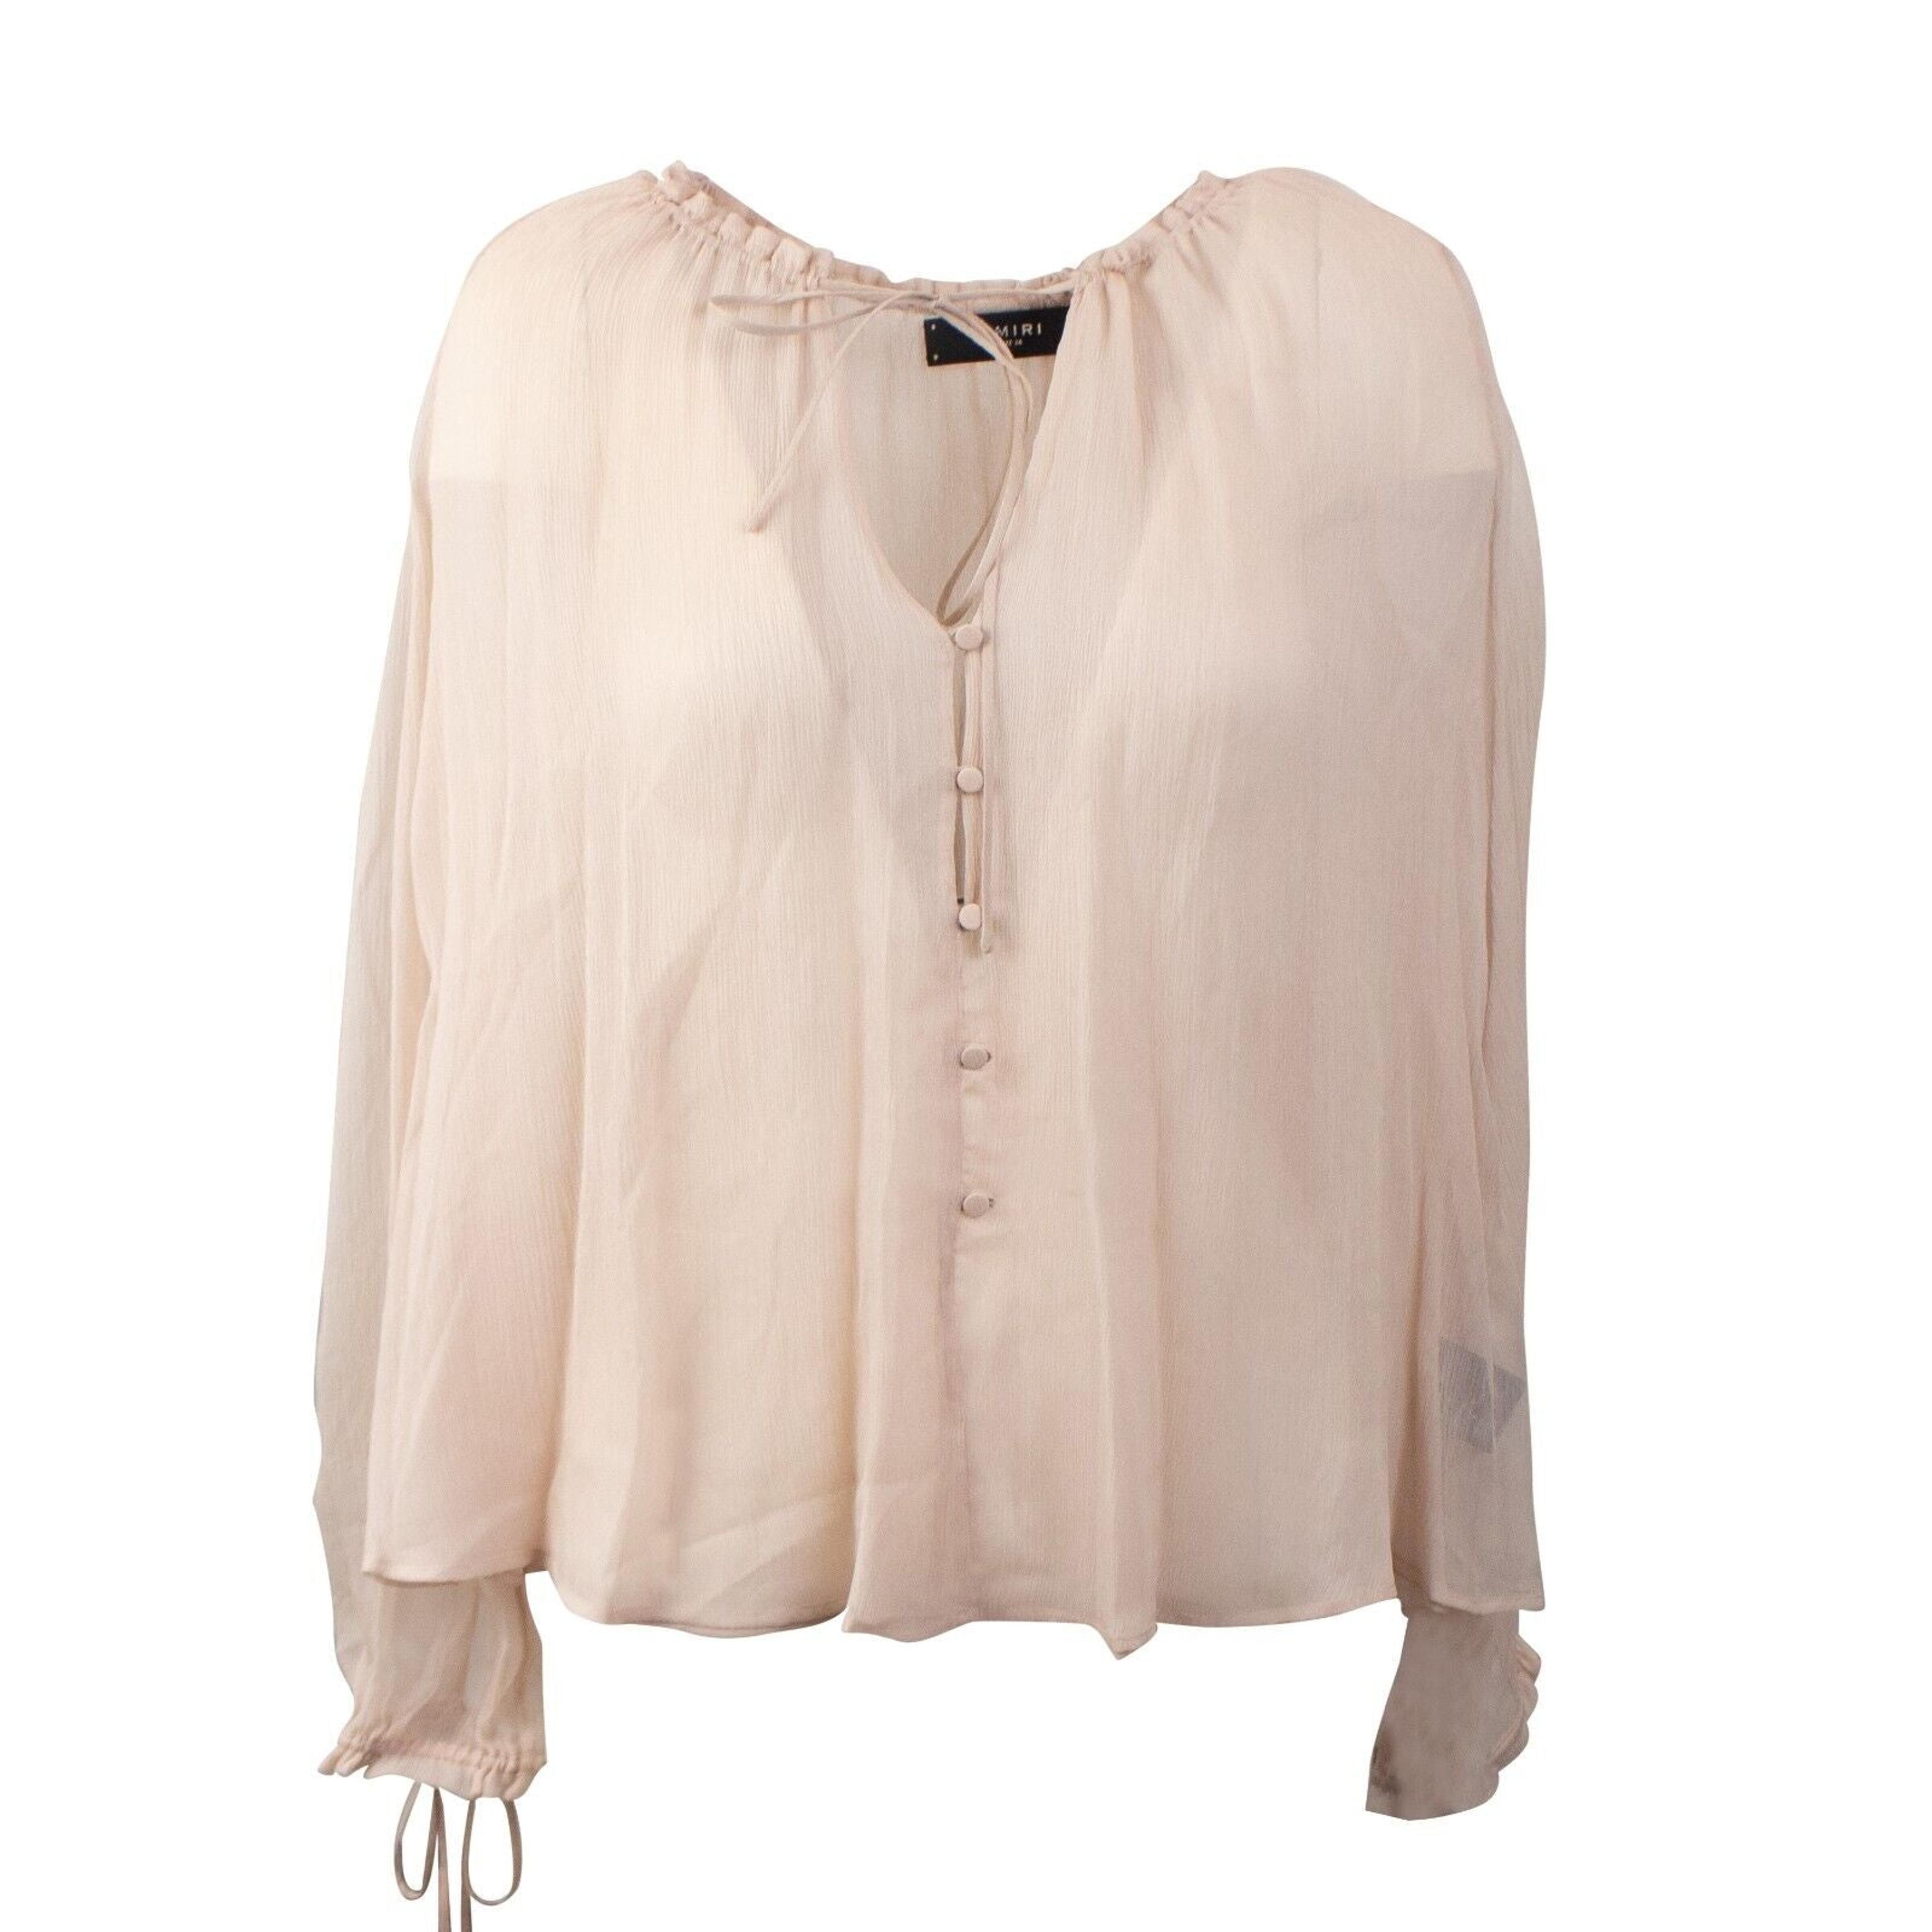 Alternate View 1 of Nude Crinkle Chiffon Blouse